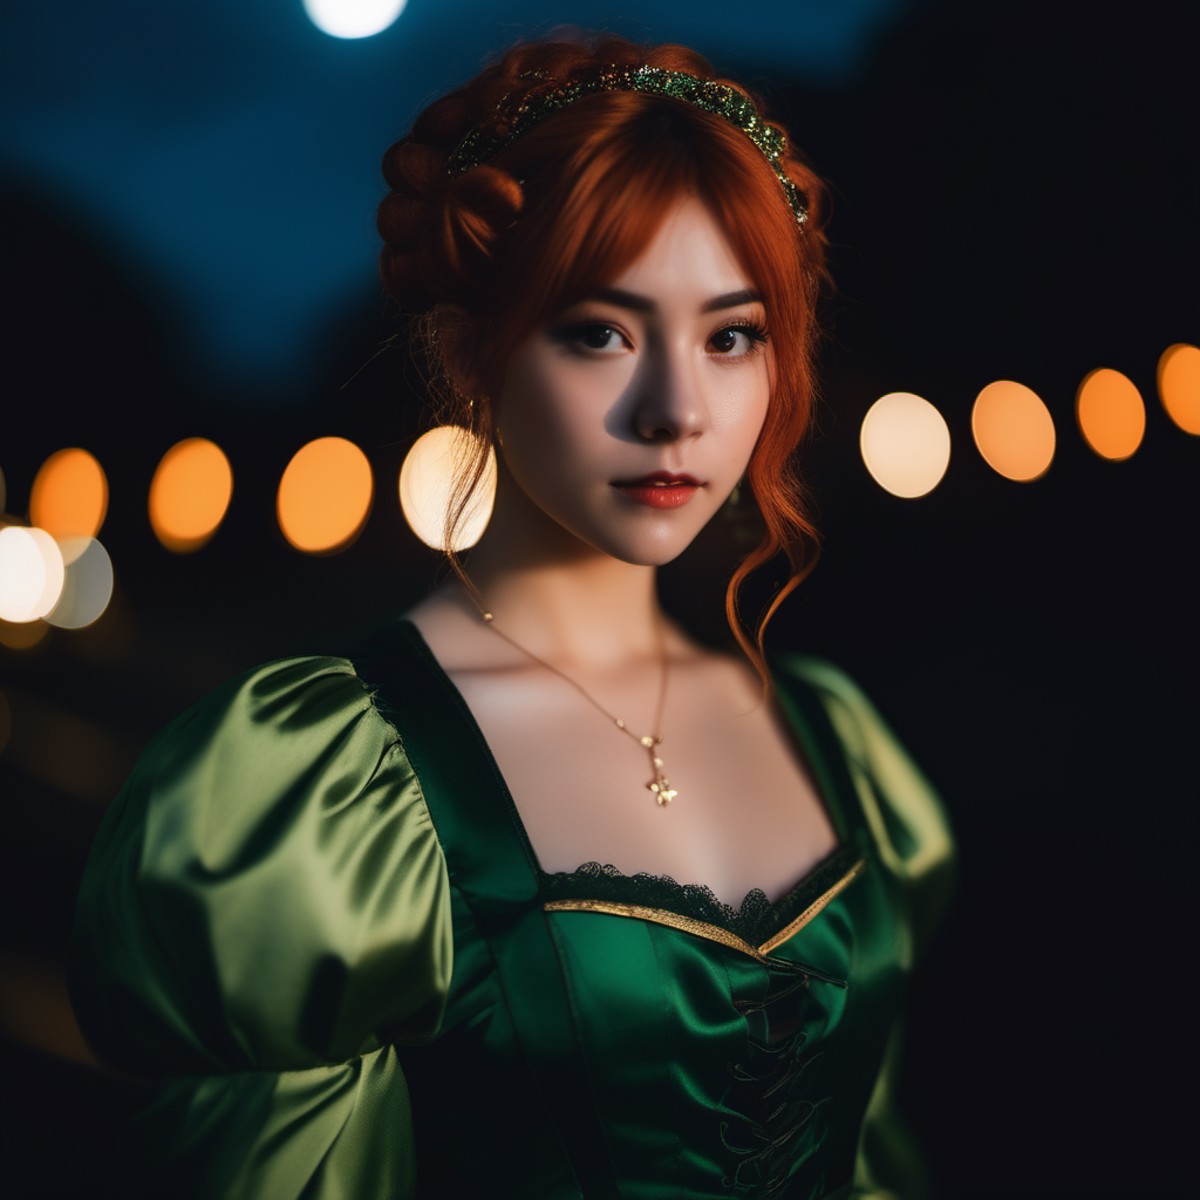 photograph, side lit, Canon R5, Flustered, 35mm, spotlit, Iphone X, Depth of field 270mm, young_woman,cosplay, Green and d...